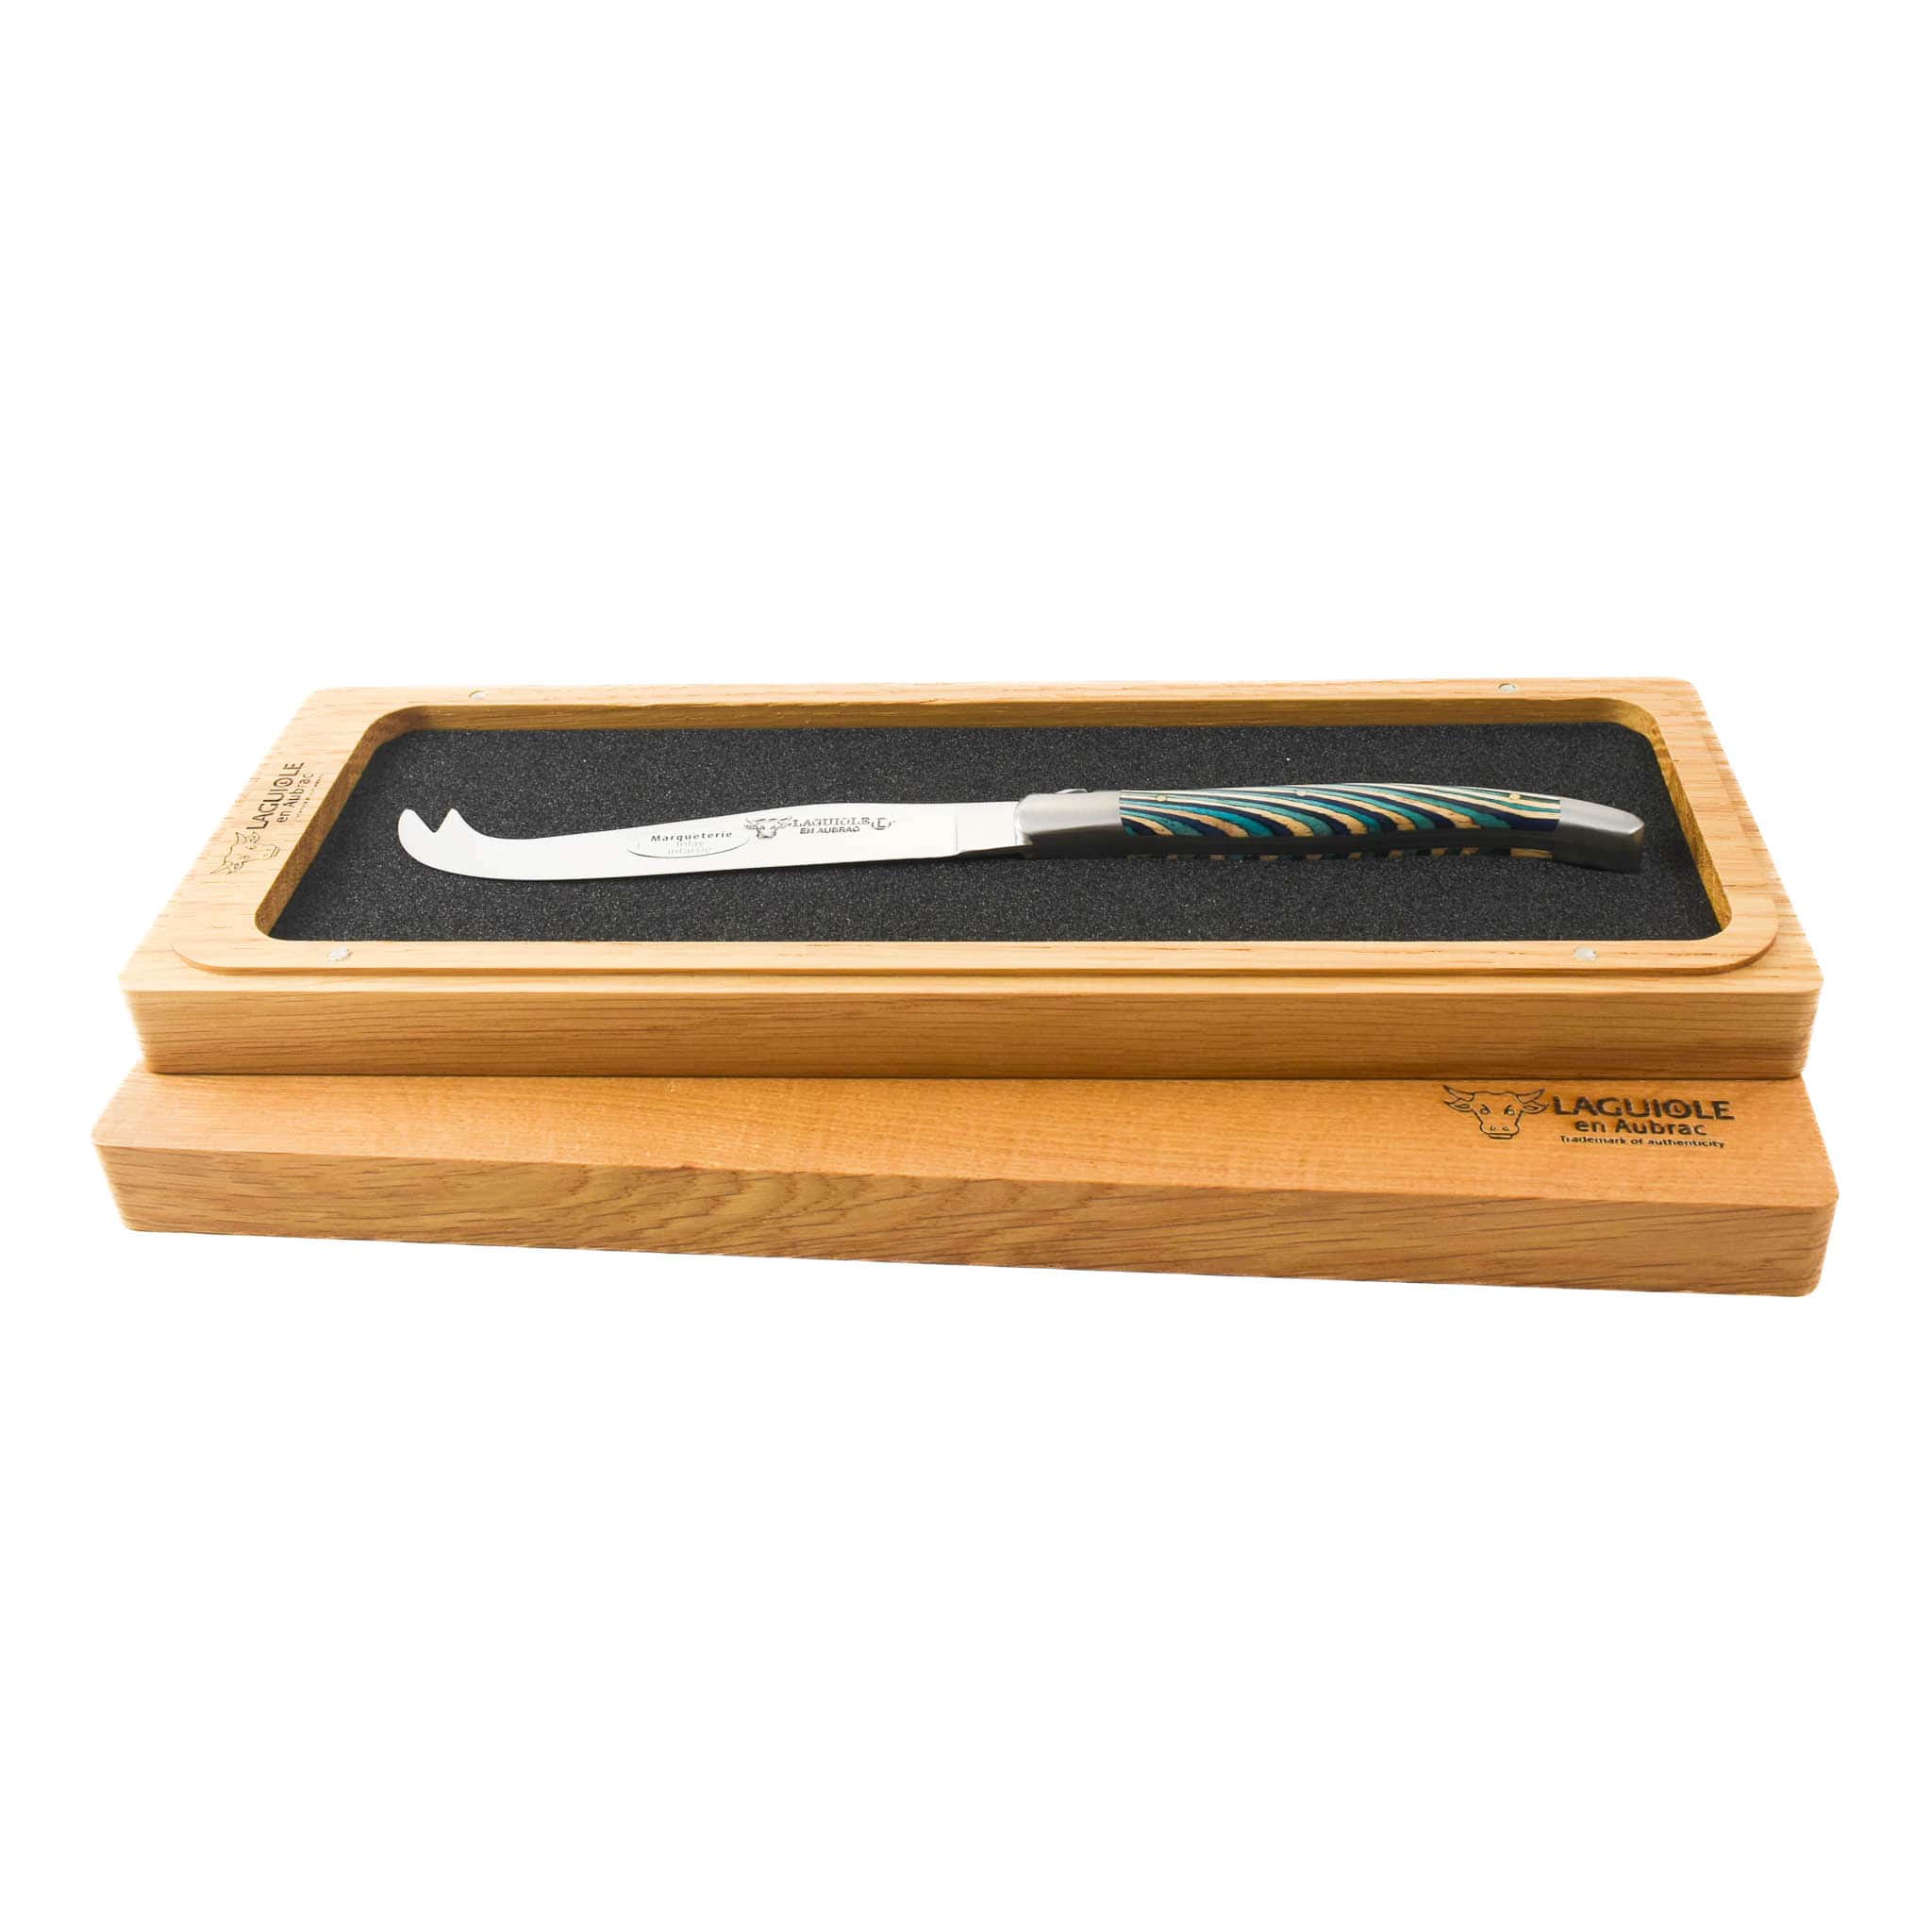 Laguiole en Aubrac Turquoise Soft Cheese Knife, Striped Wood